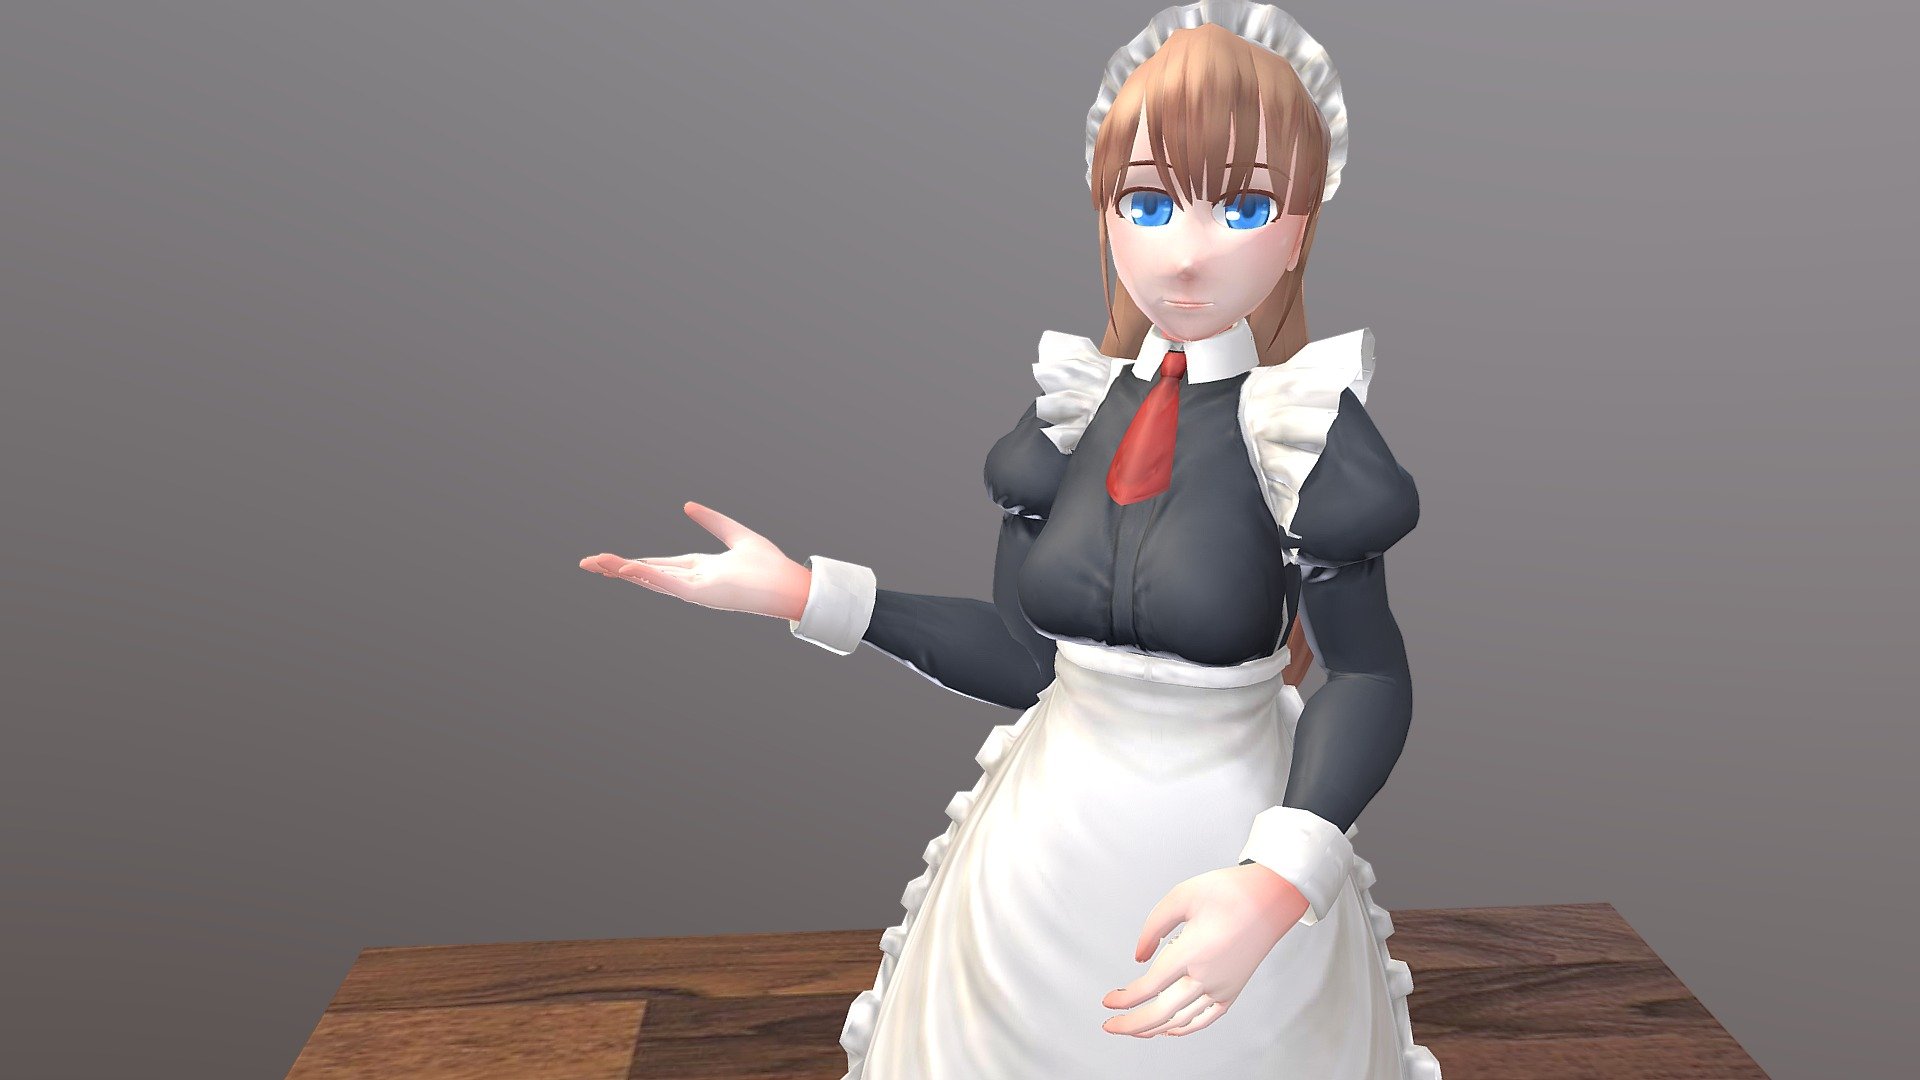 Maid 3d Model By Other5555 266a248 Sketchfab